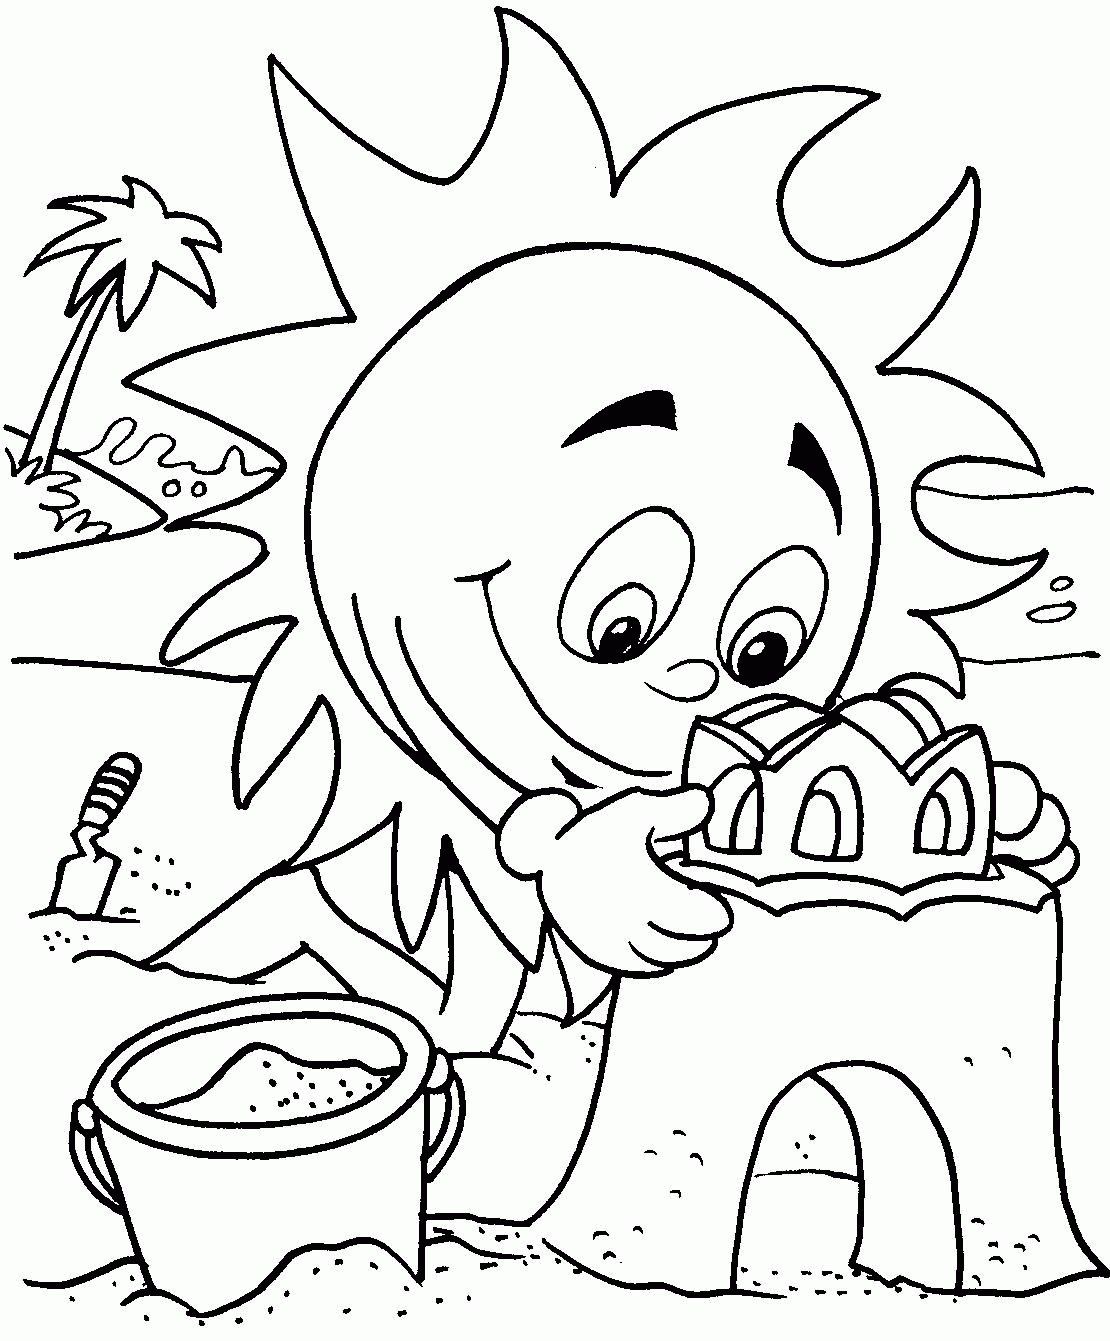 beach coloring pages printable - Free Large Images